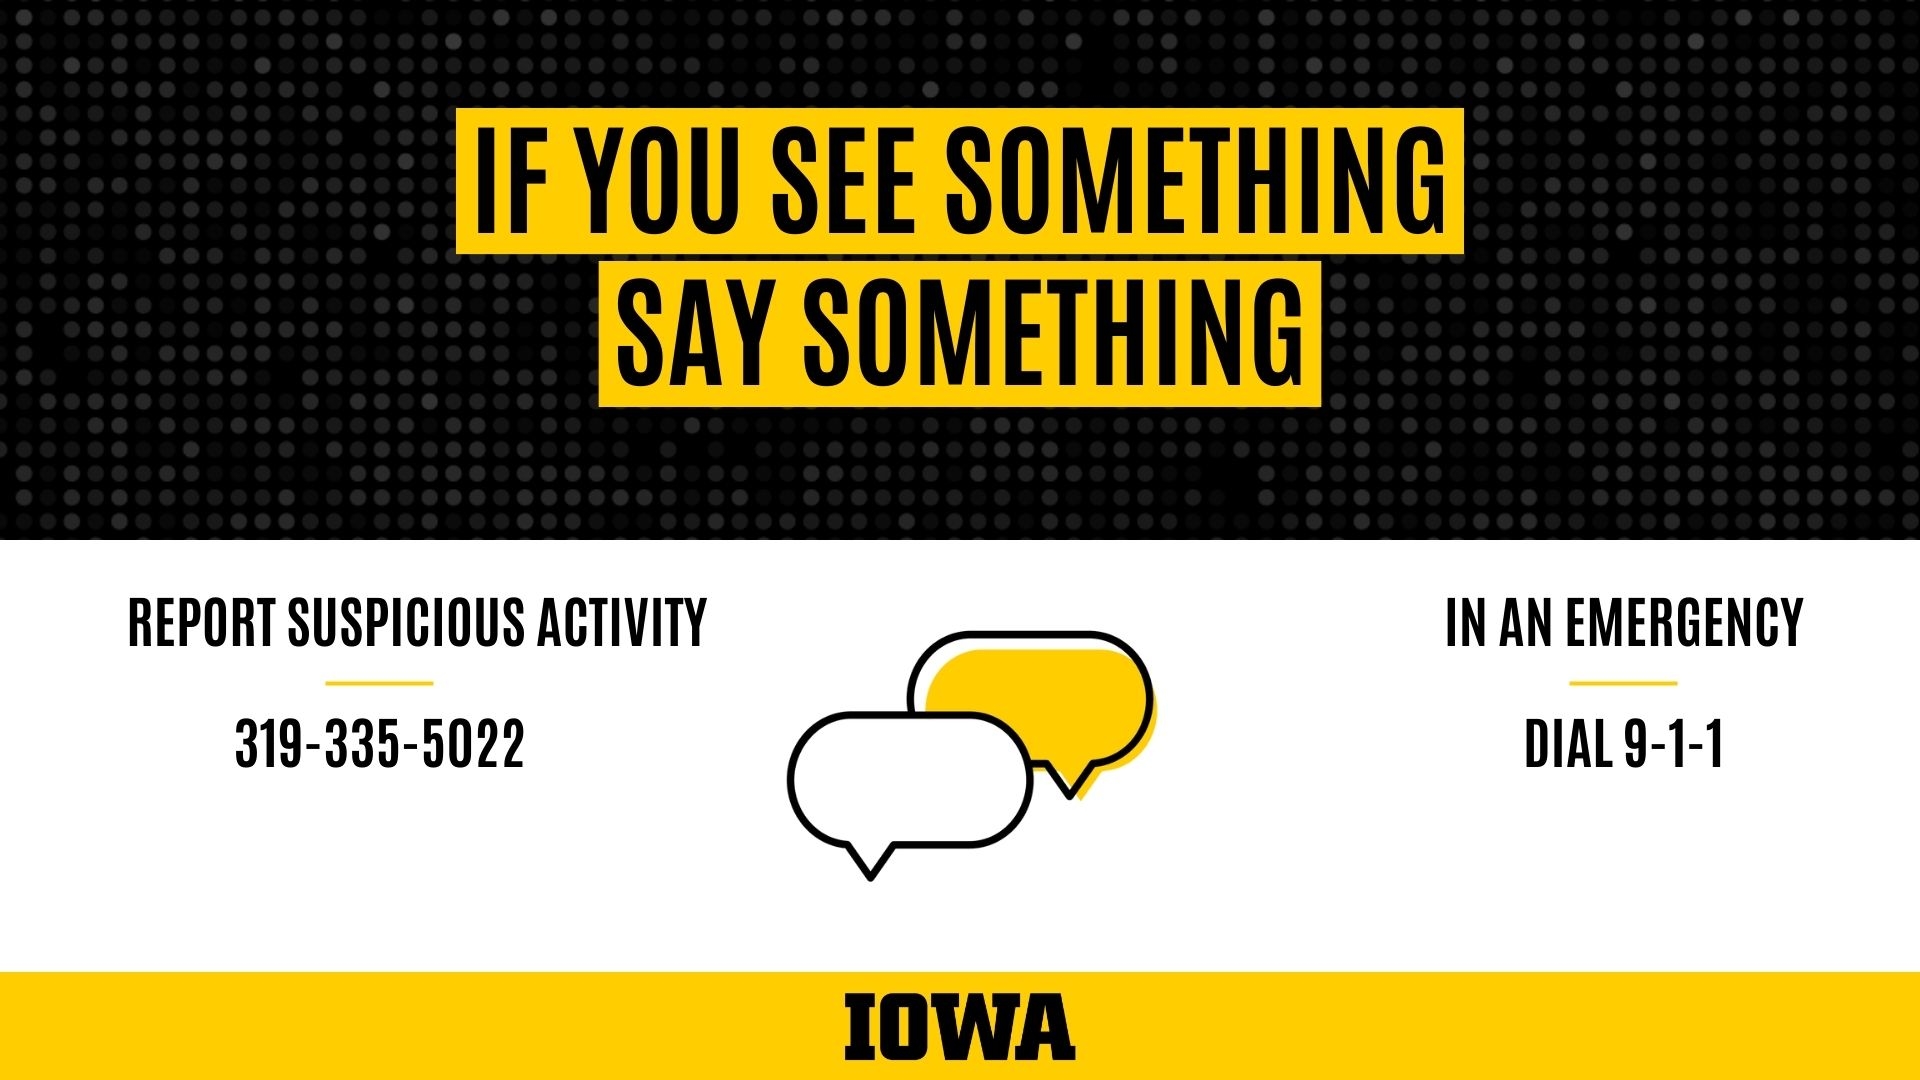 If you see something, say something. Report suspicious activity by calling 319-335-5022. In an emergency, call 911.